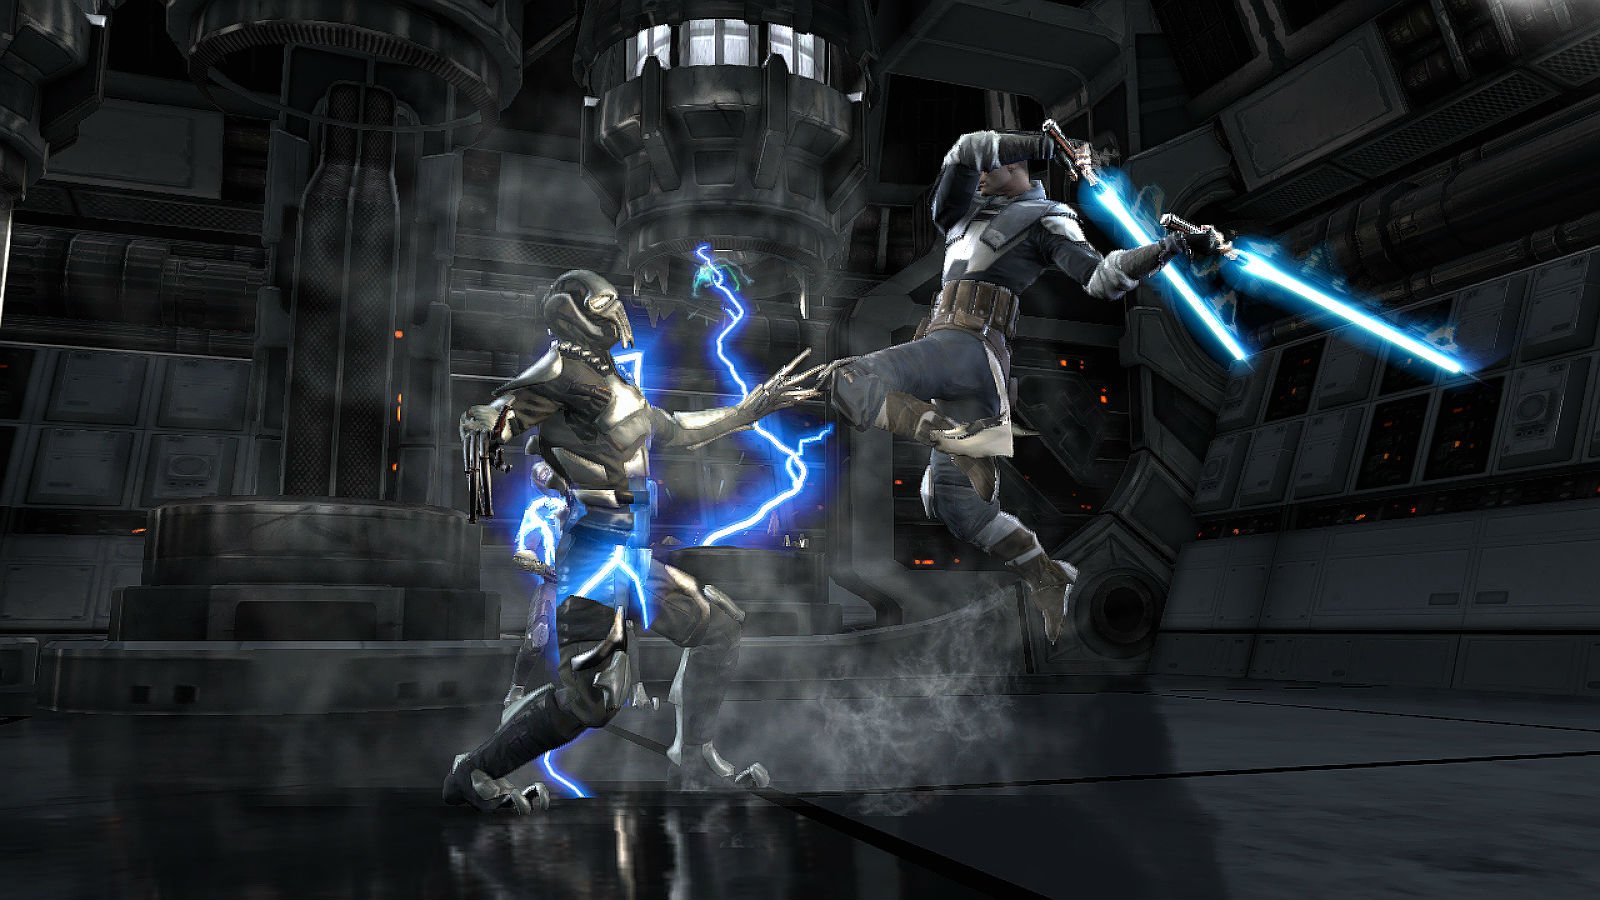 Star Wars Force Unleashed Sci Fi Futuristic Action Fighting Warrior